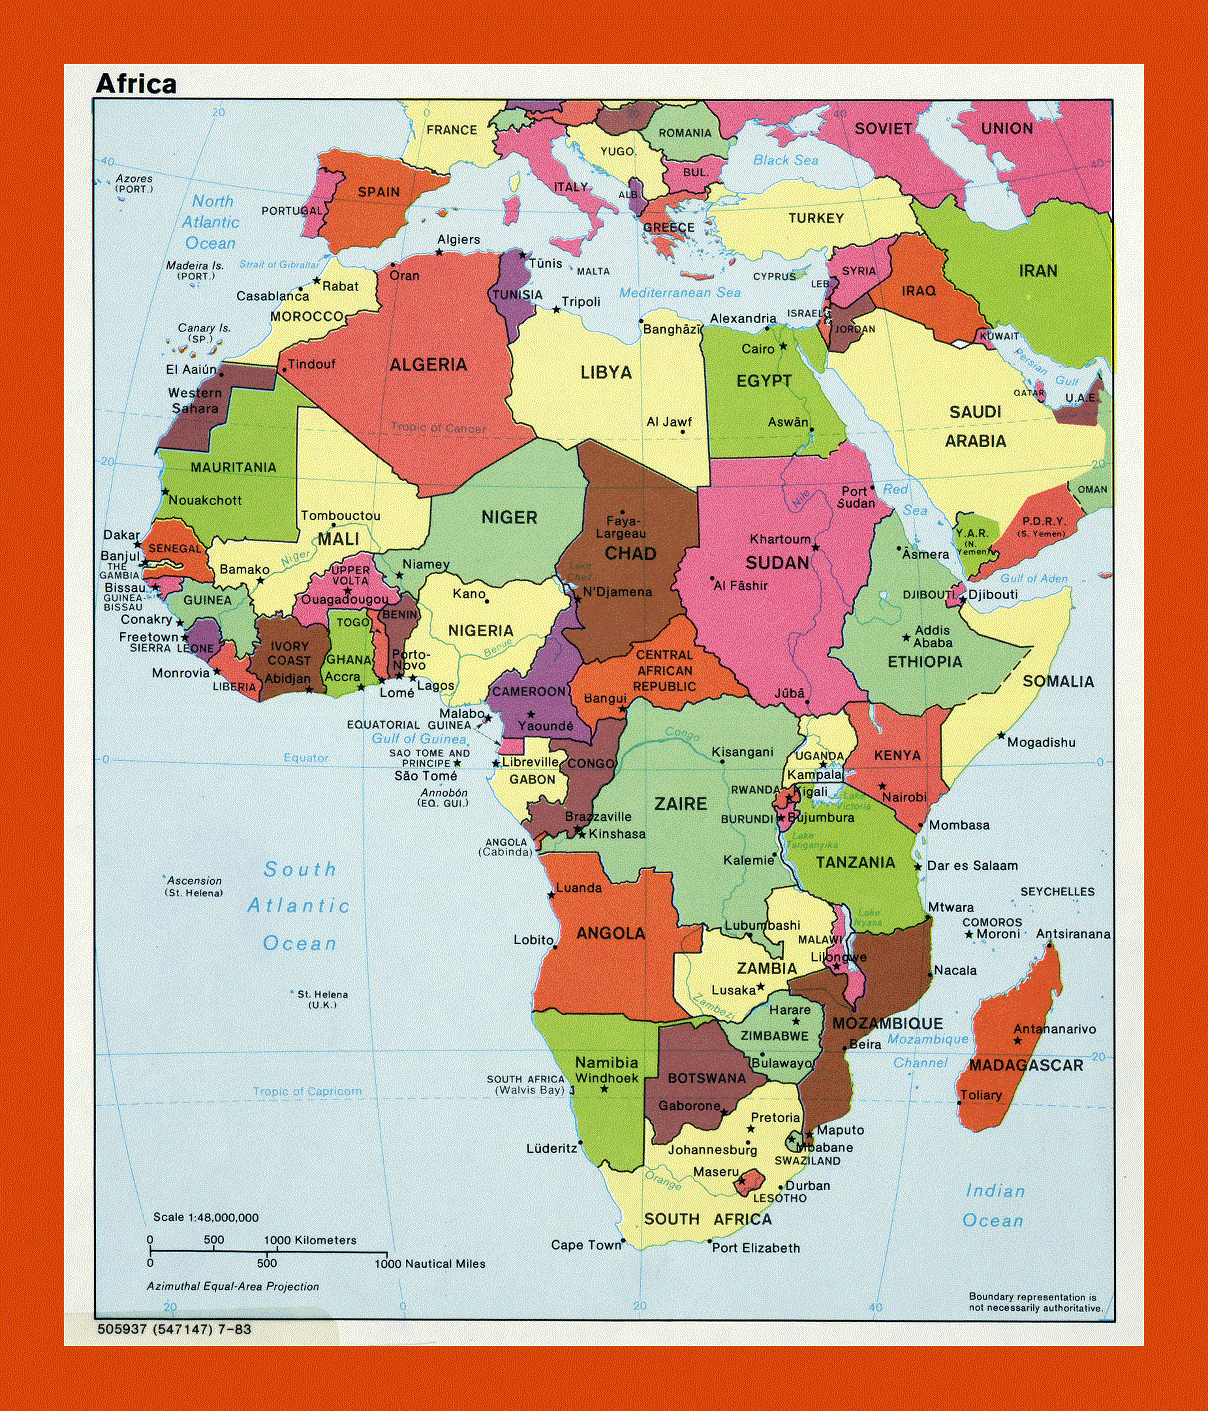 Political map of Africa - 1983